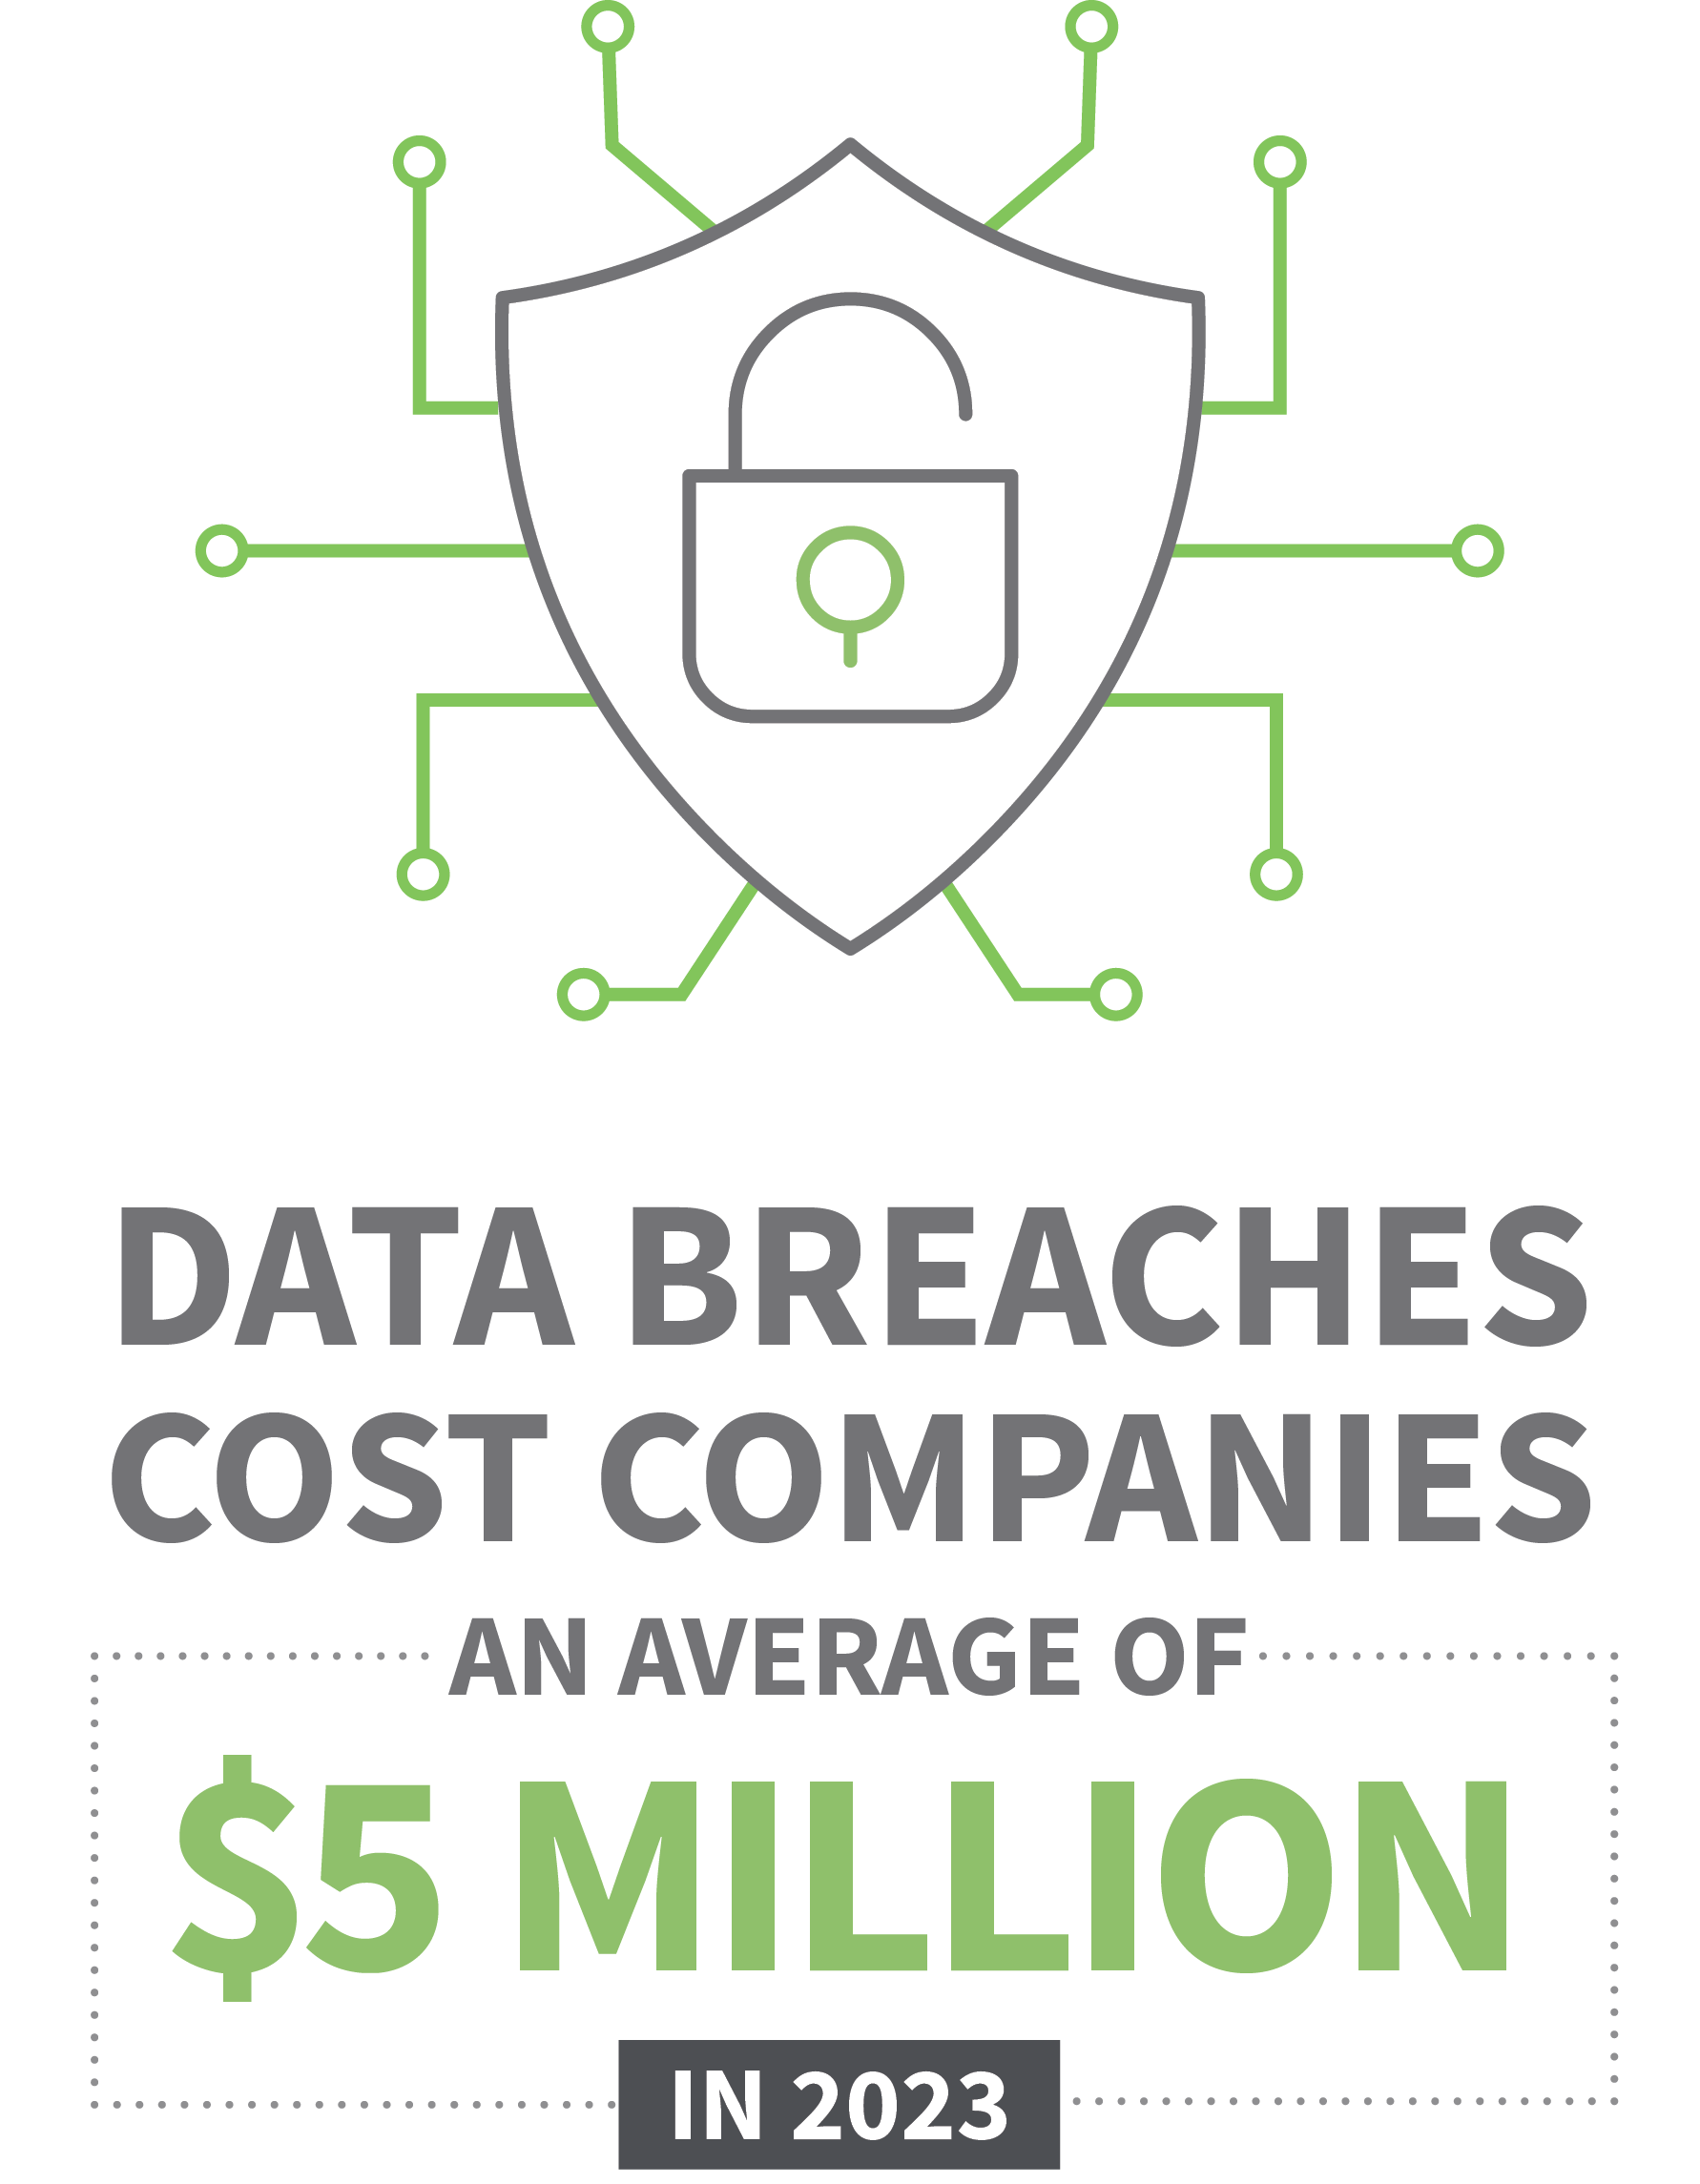 The cost of data breaches